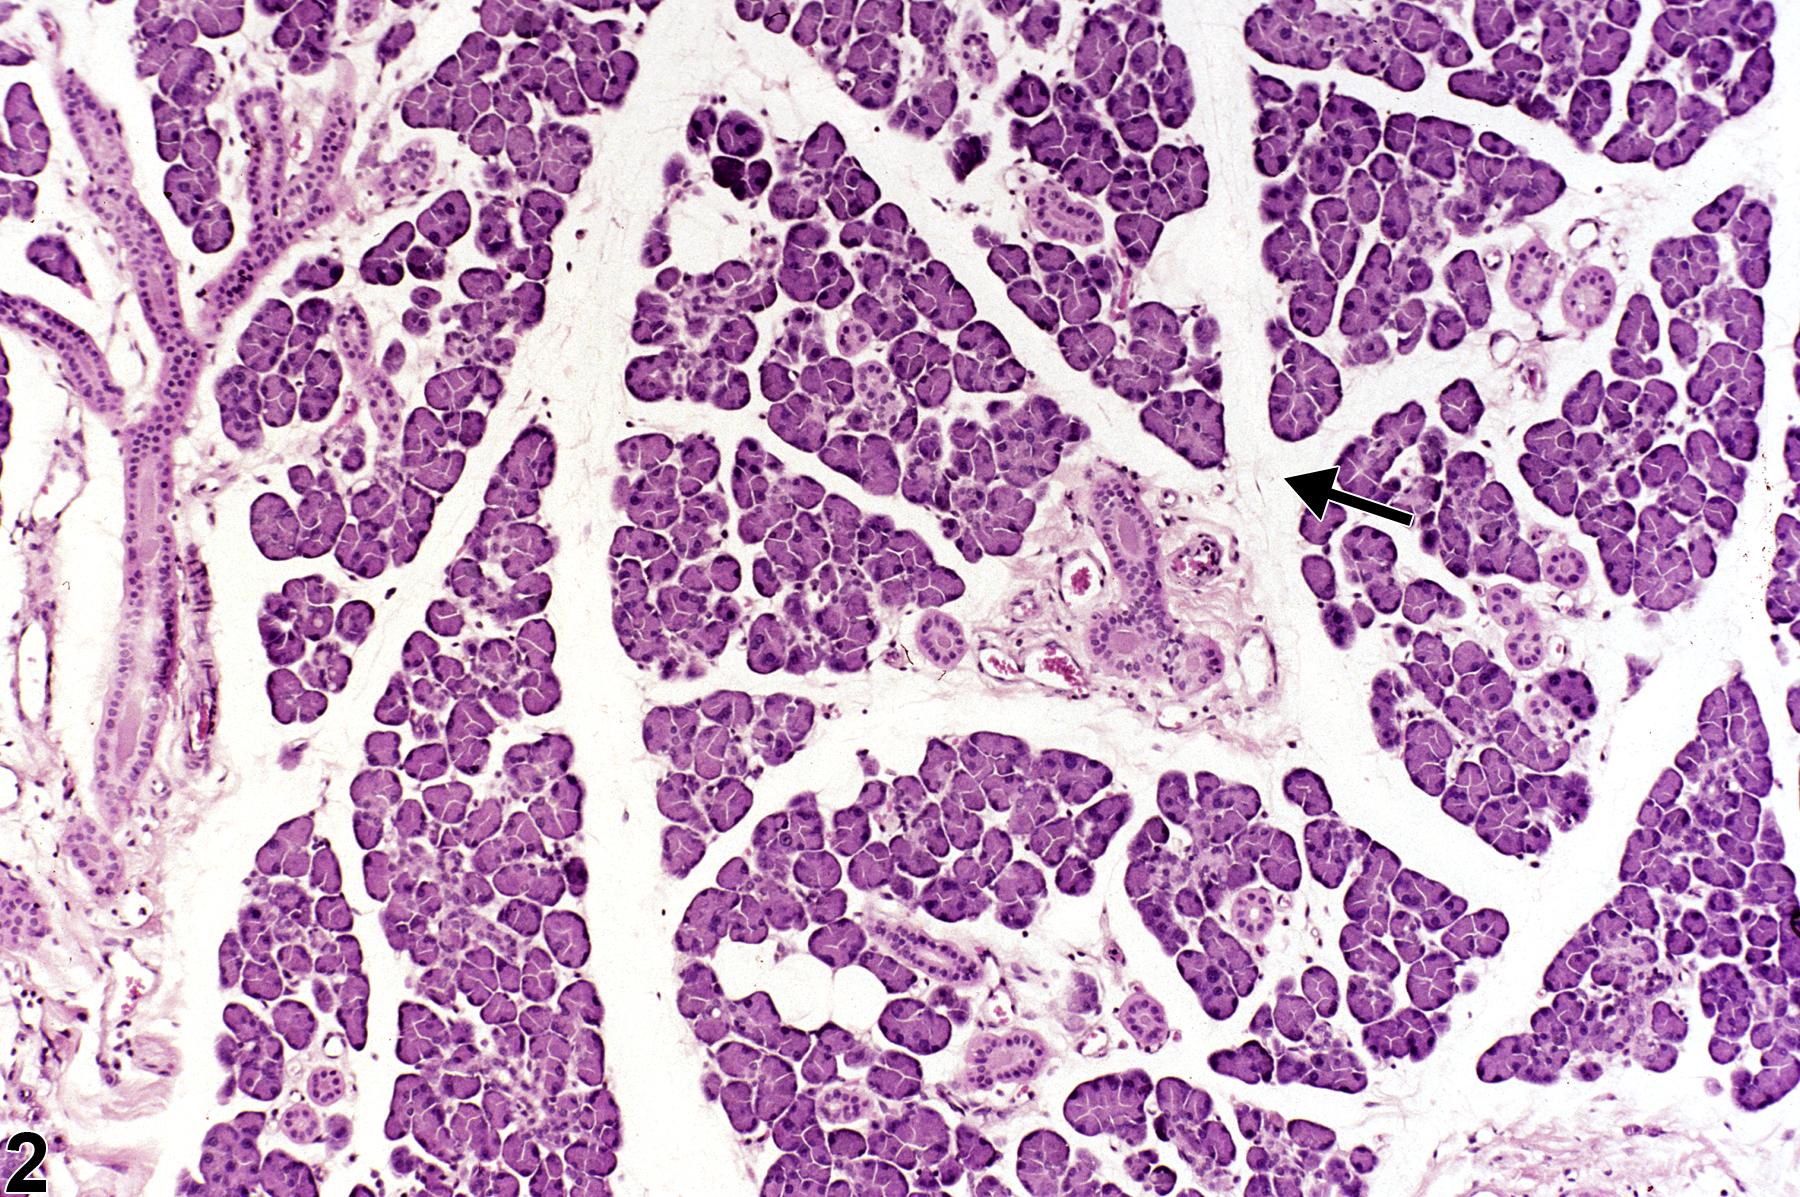 Image of edema in the salivary gland from a male F344/N rat in a chronic study